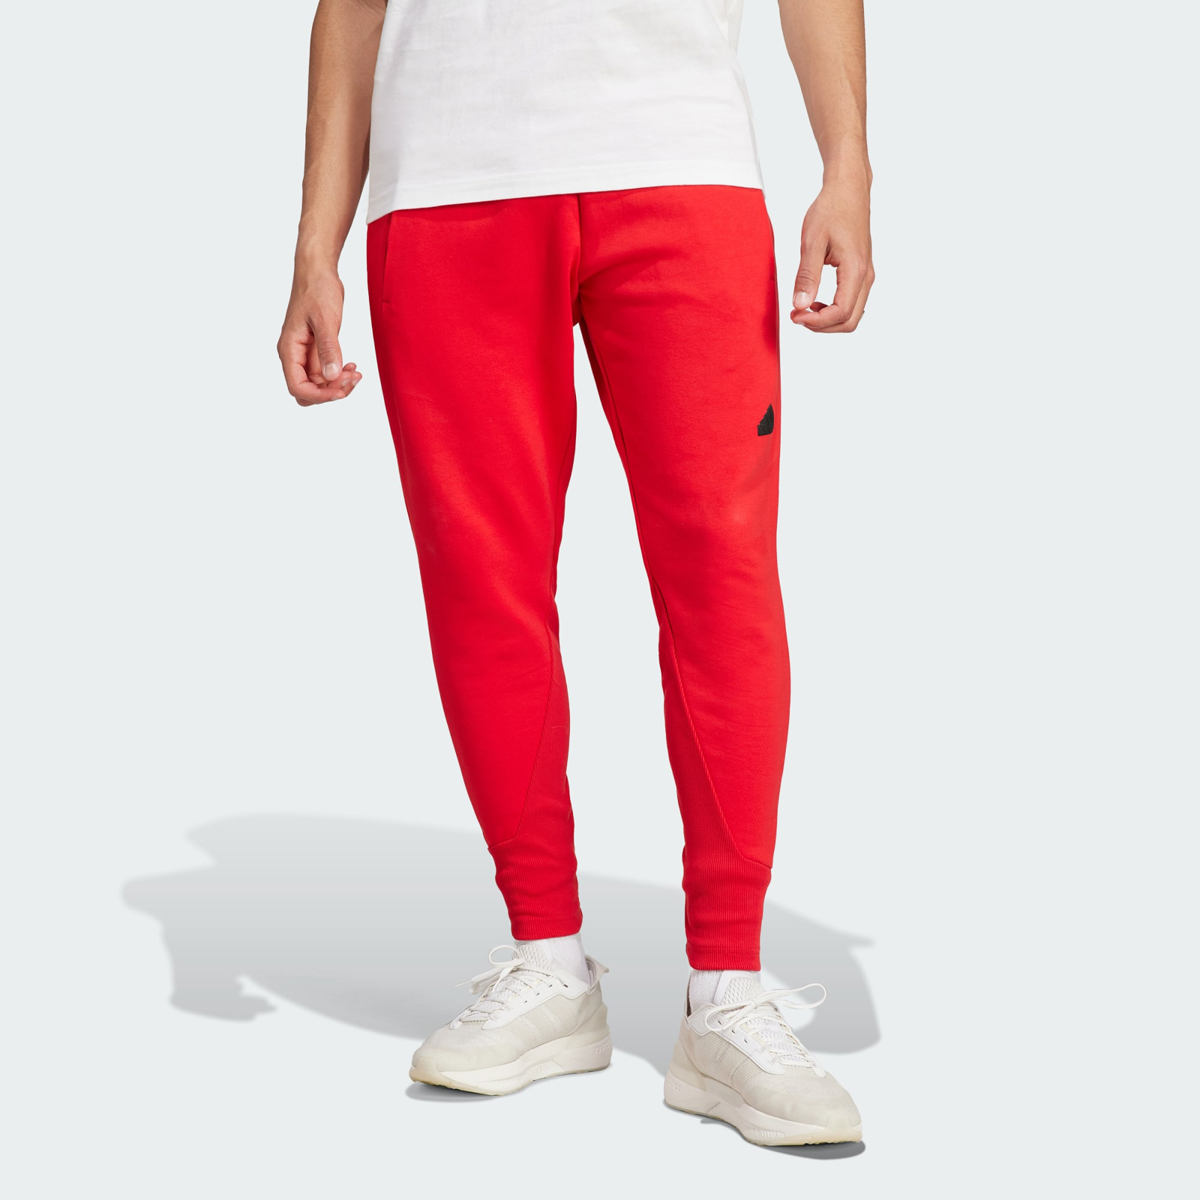 adidas-ZNE-Premium-Pants-Better-Scarlet-Red